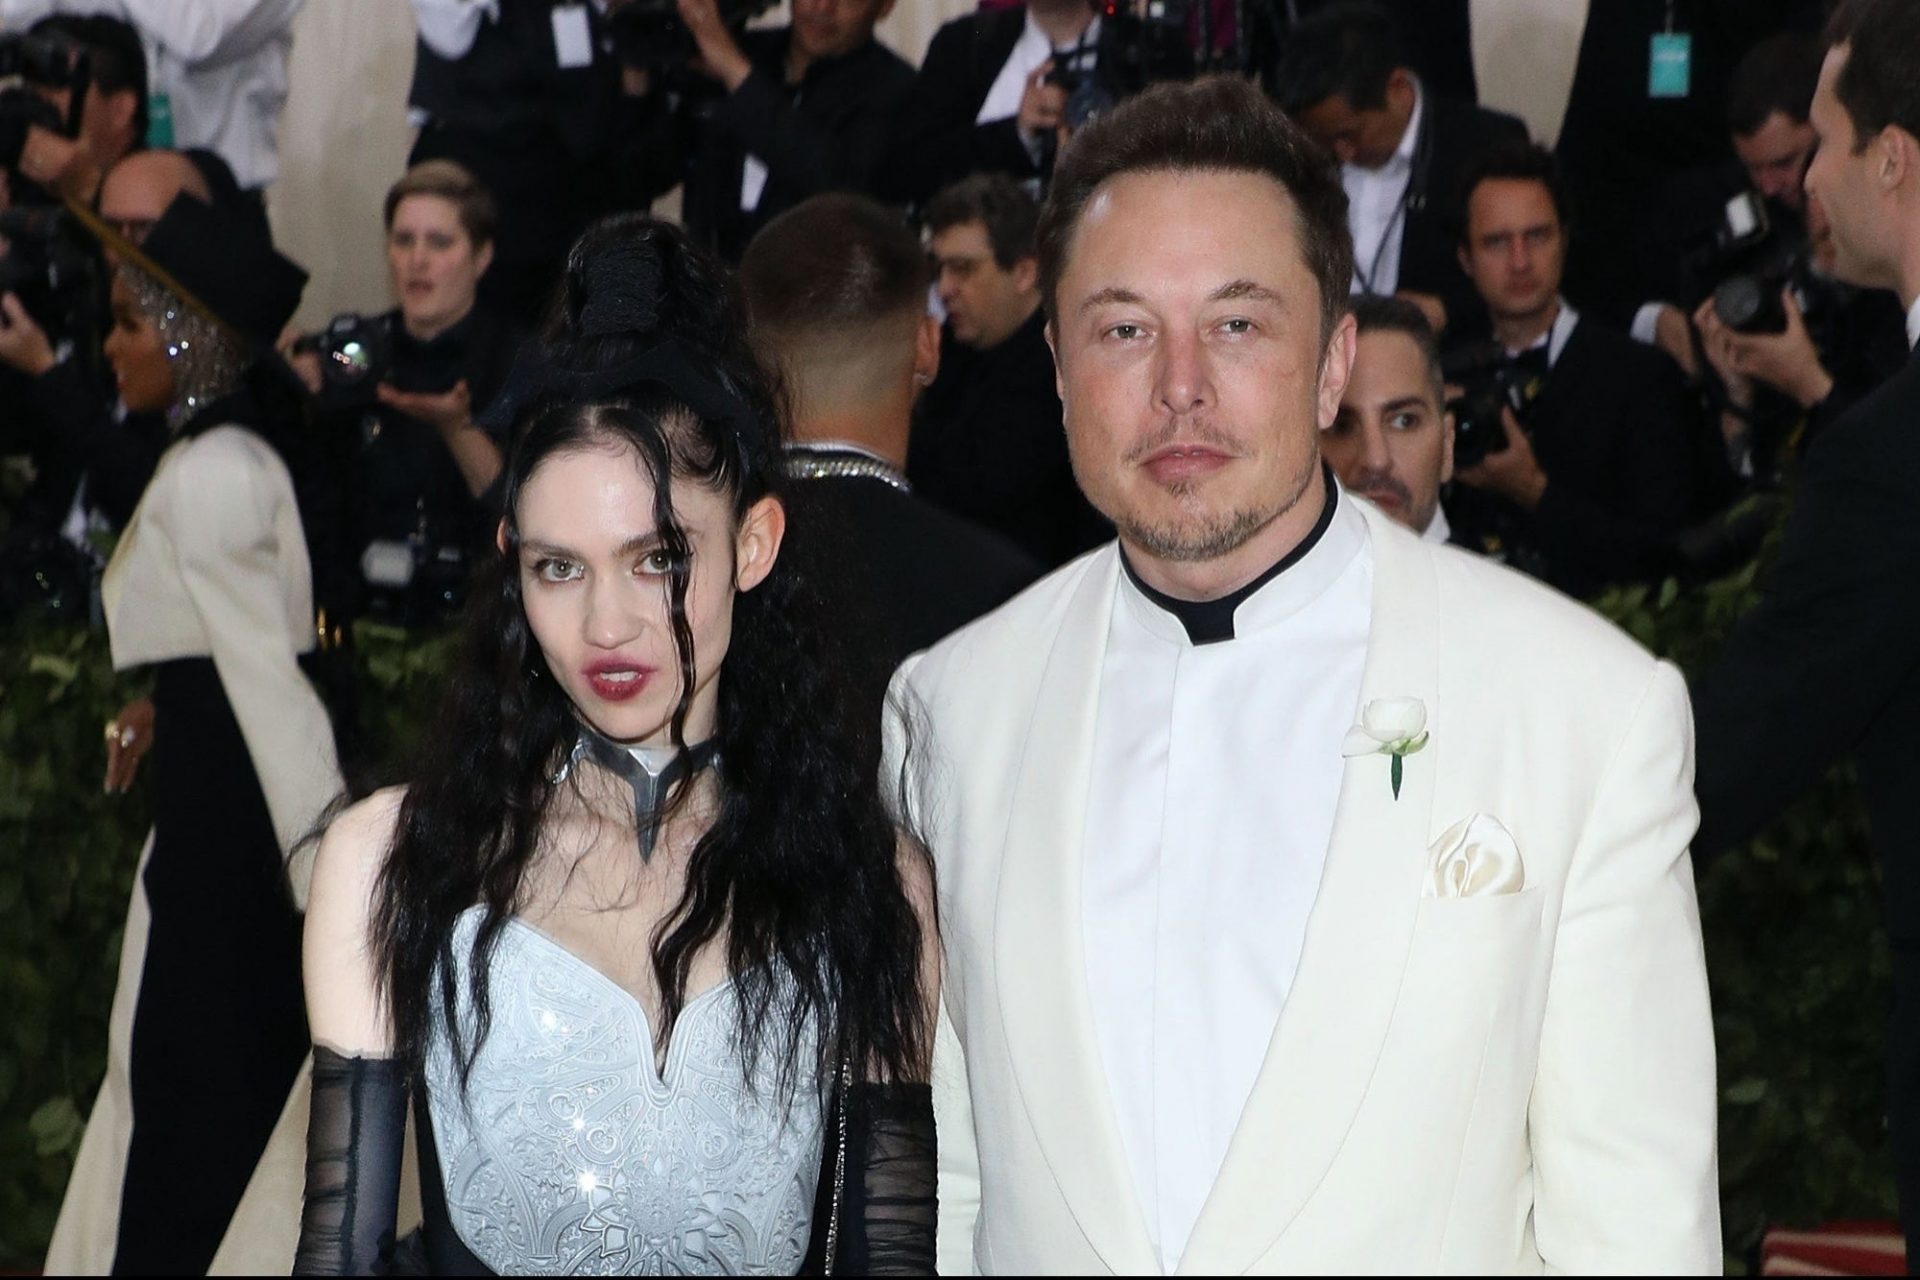 ‘We’re semi-separated,’ Elon Musk says of his relationship with singer Grimes